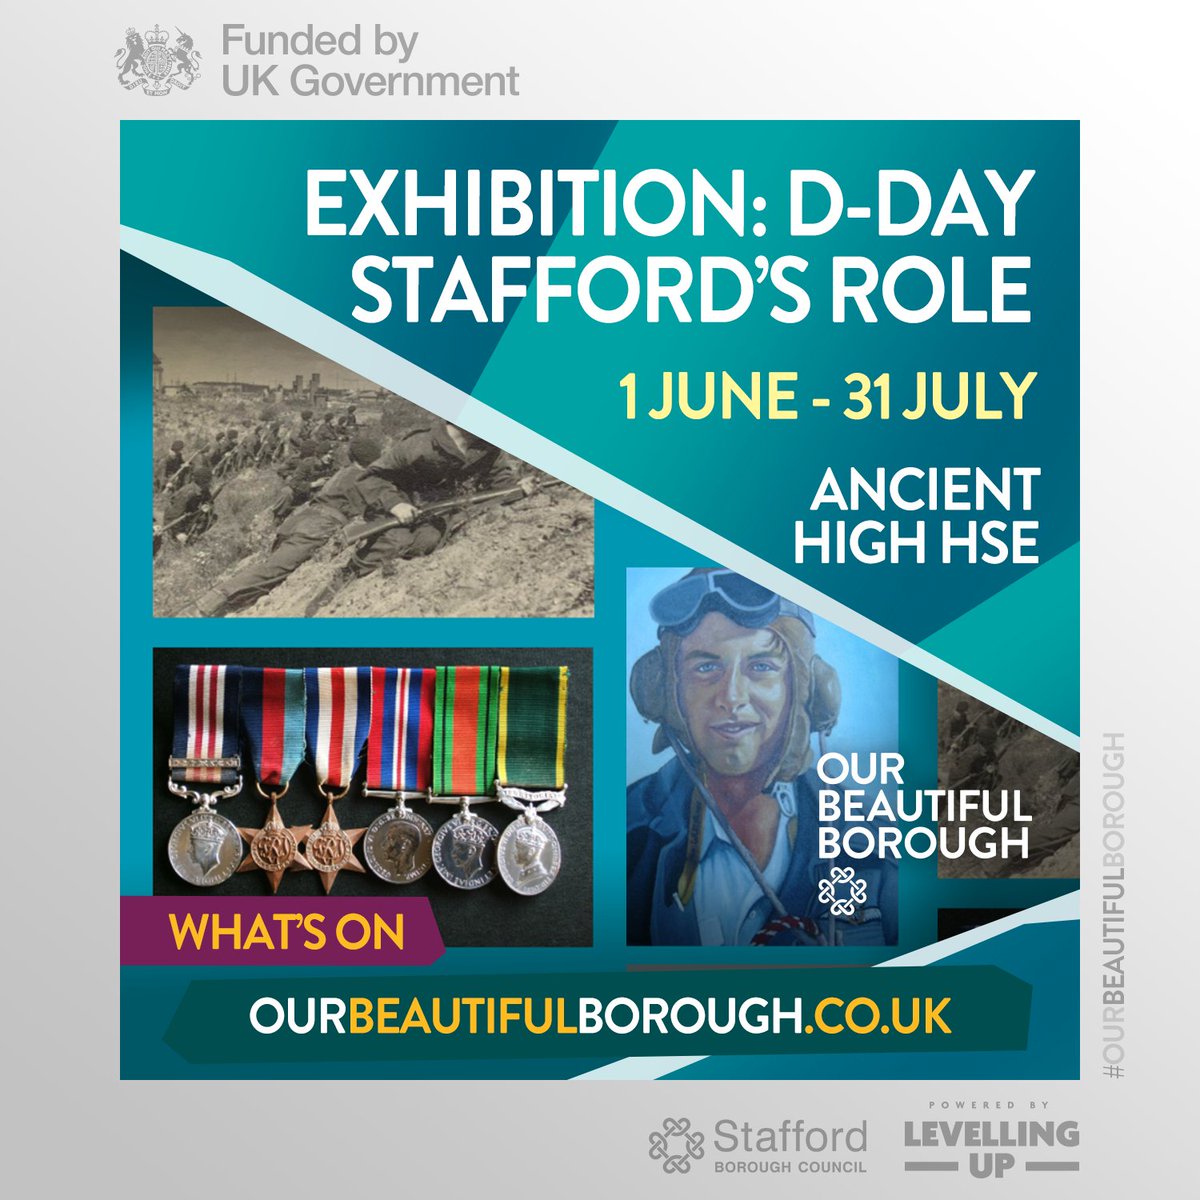 An exhibition looking at the stories of Staffordian’s experiences on #DDay begins at #Stafford's #AncientHighHouse on Sat 1 June and will run to 31 July. Enjoy rare images, medals and personal artefacts: tinyurl.com/52phfjpp #DaysOut #SpecialOccasions #OurBeautifulBorough